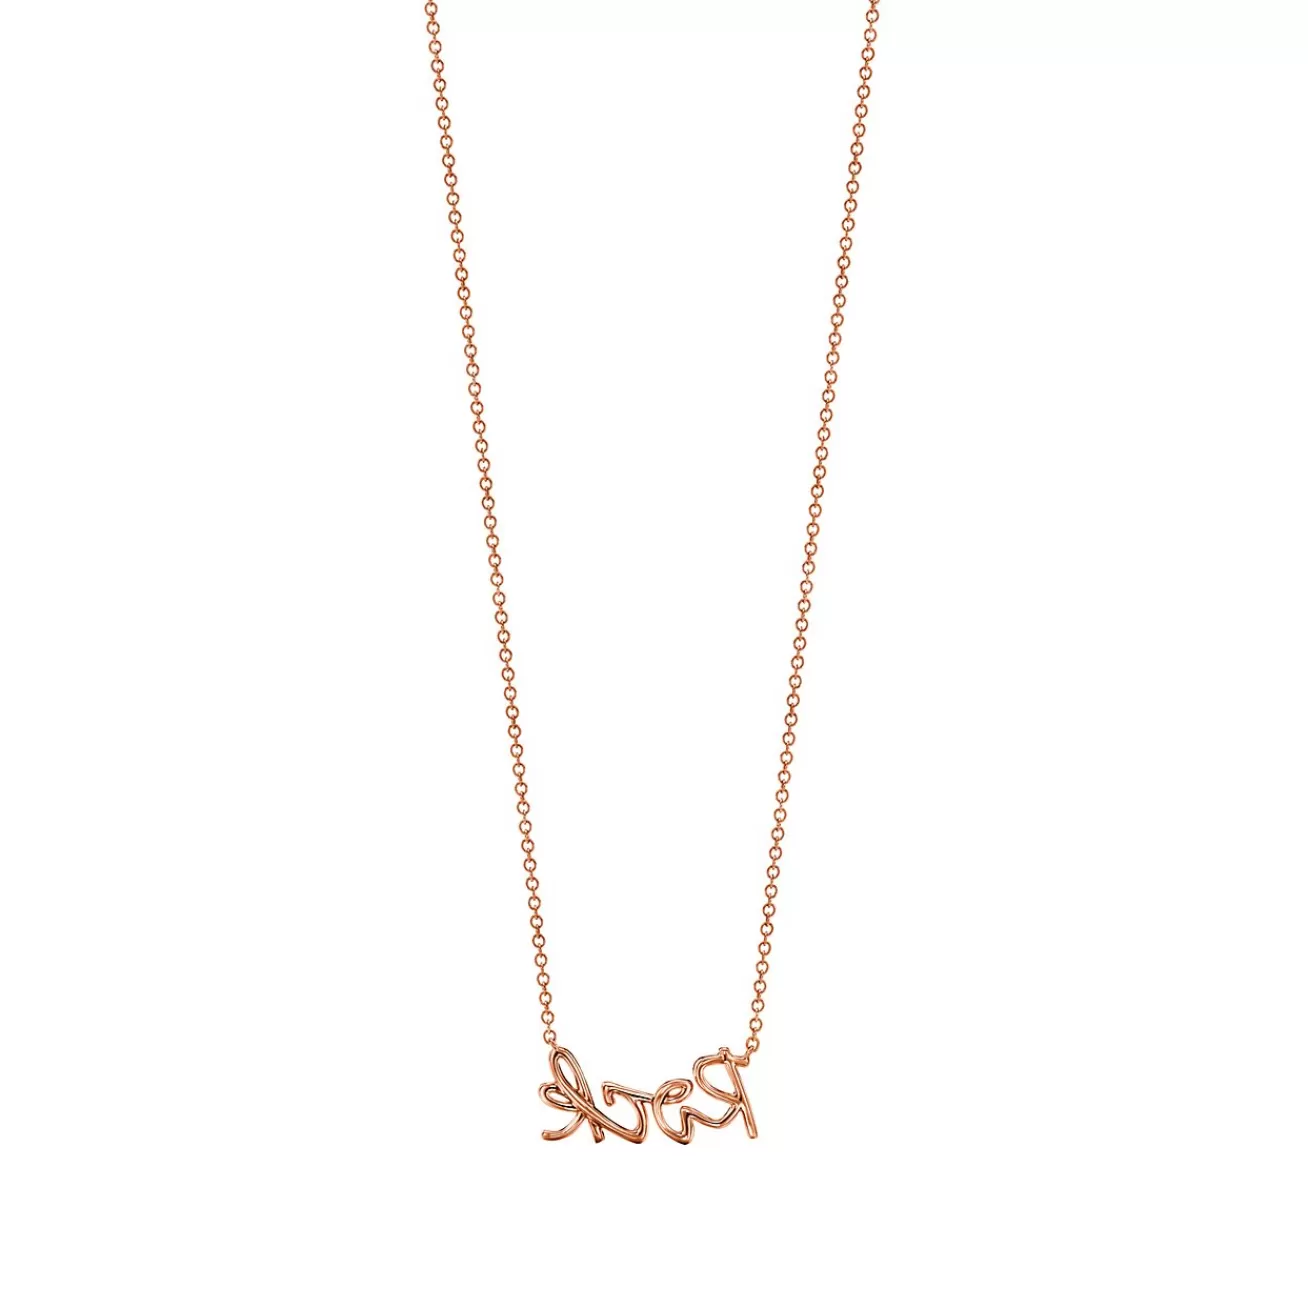 Tiffany & Co. Paloma's Graffiti rock pendant in 18k rose gold with diamonds. | ^ Necklaces & Pendants | Rose Gold Jewelry